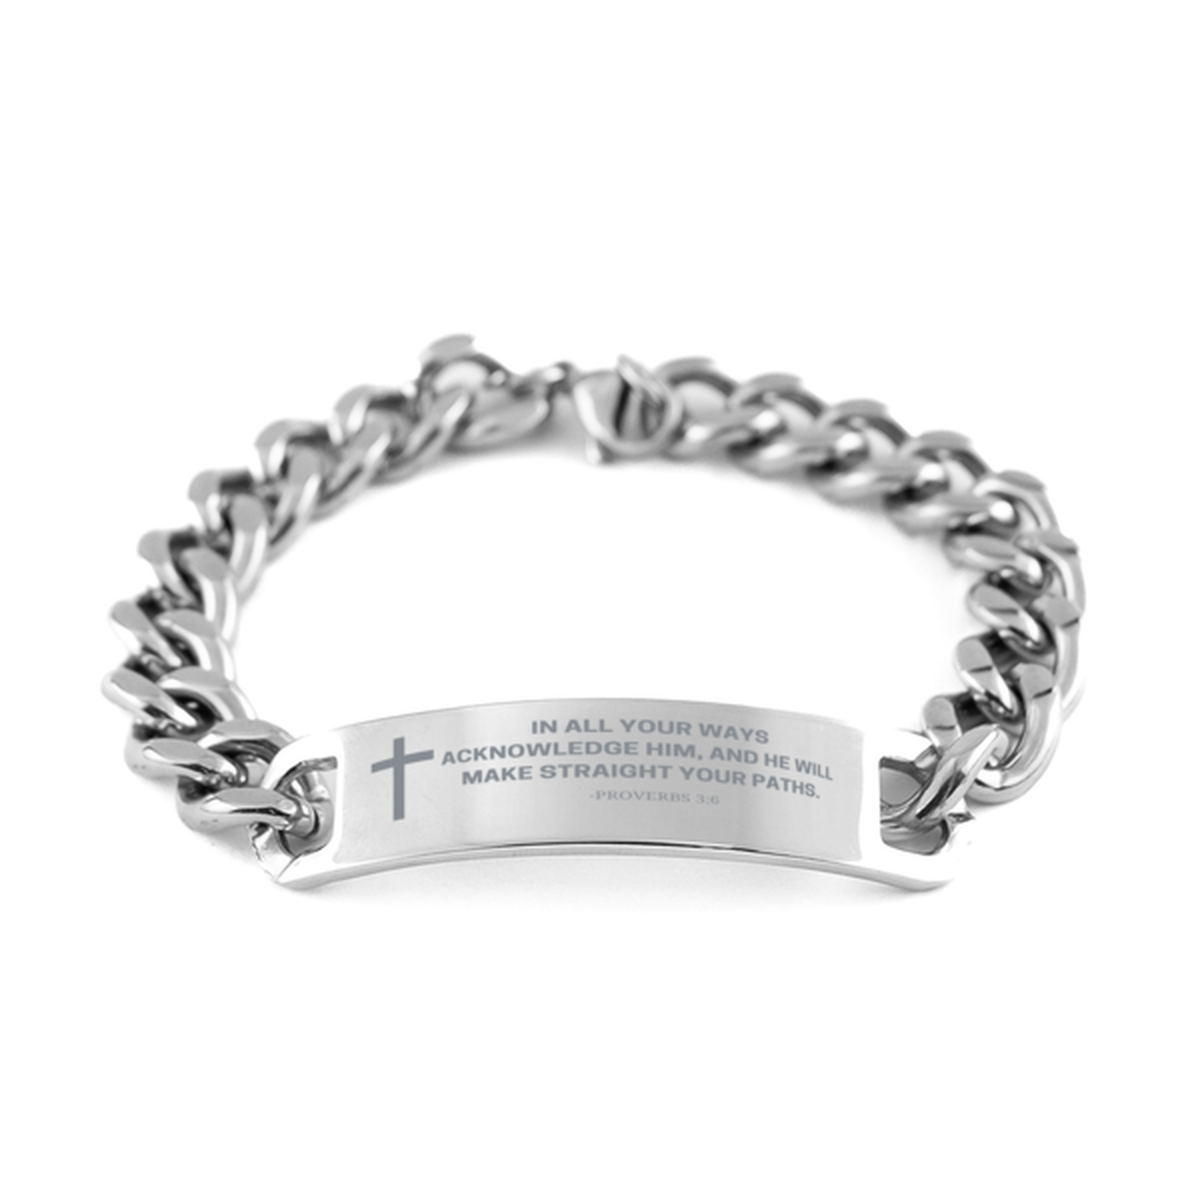 Baptism Gifts For Teenage Boys Girls, Christian Bible Verse Cuban Chain Bracelet, In all your ways acknowledge Him, Catholic Confirmation Gifts for Son, Godson, Grandson, Nephew